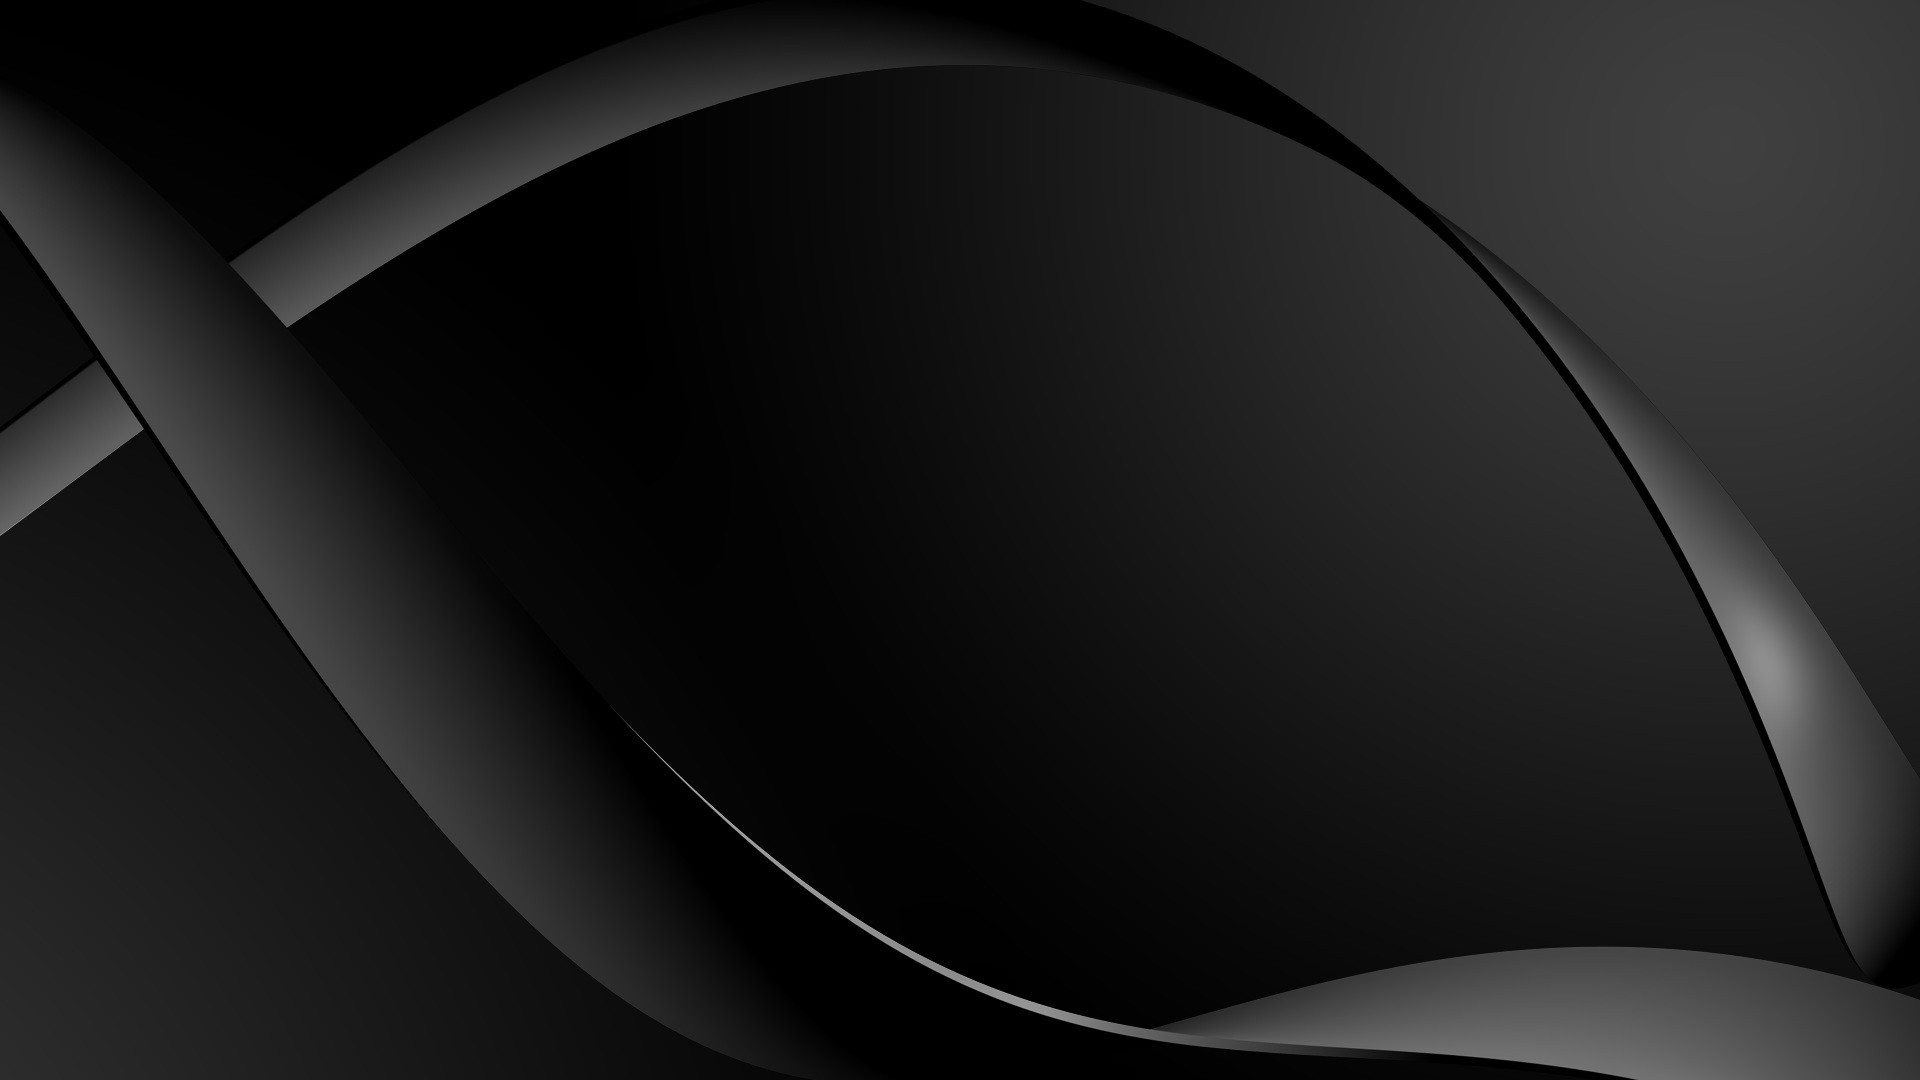  black  Abstract  Wallpapers  HD  Desktop and Mobile Backgrounds